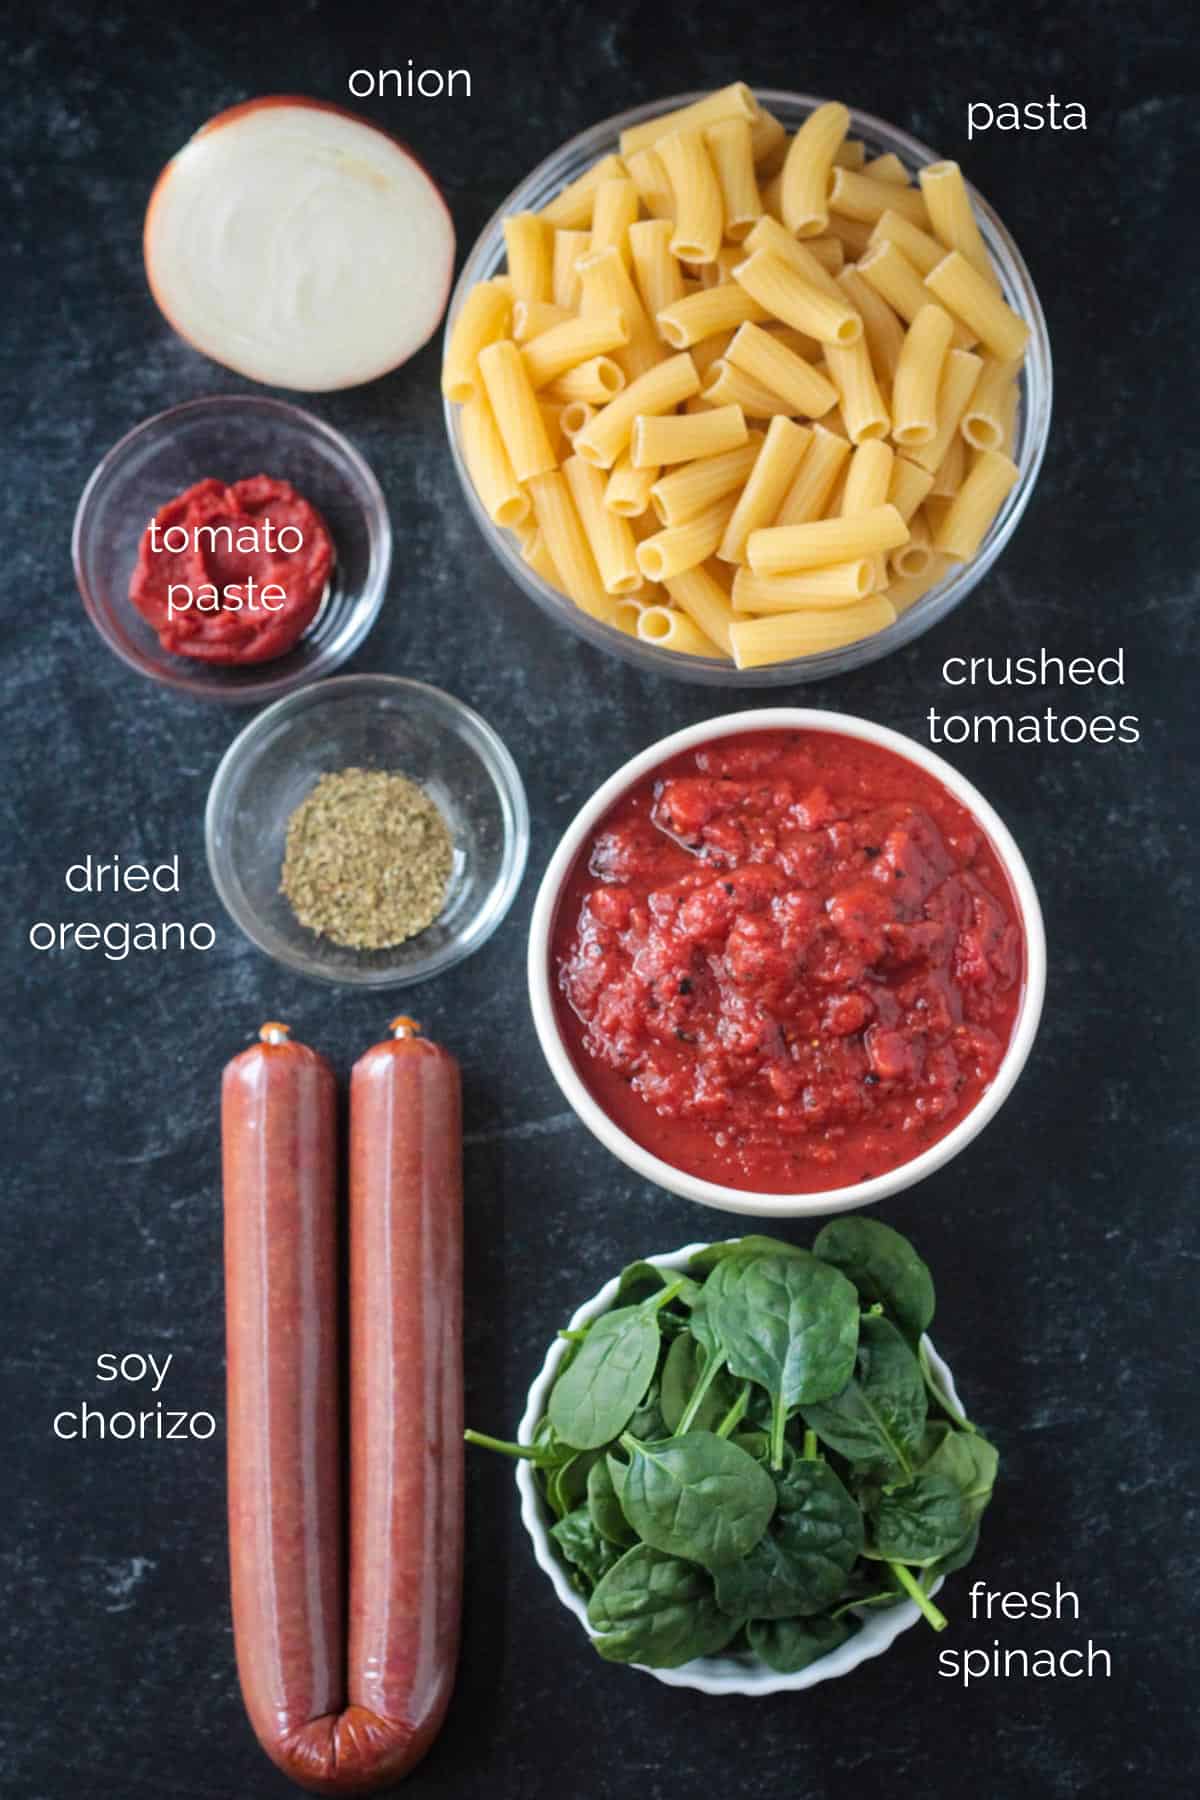 Recipe ingredients arrayed in individual dishes.